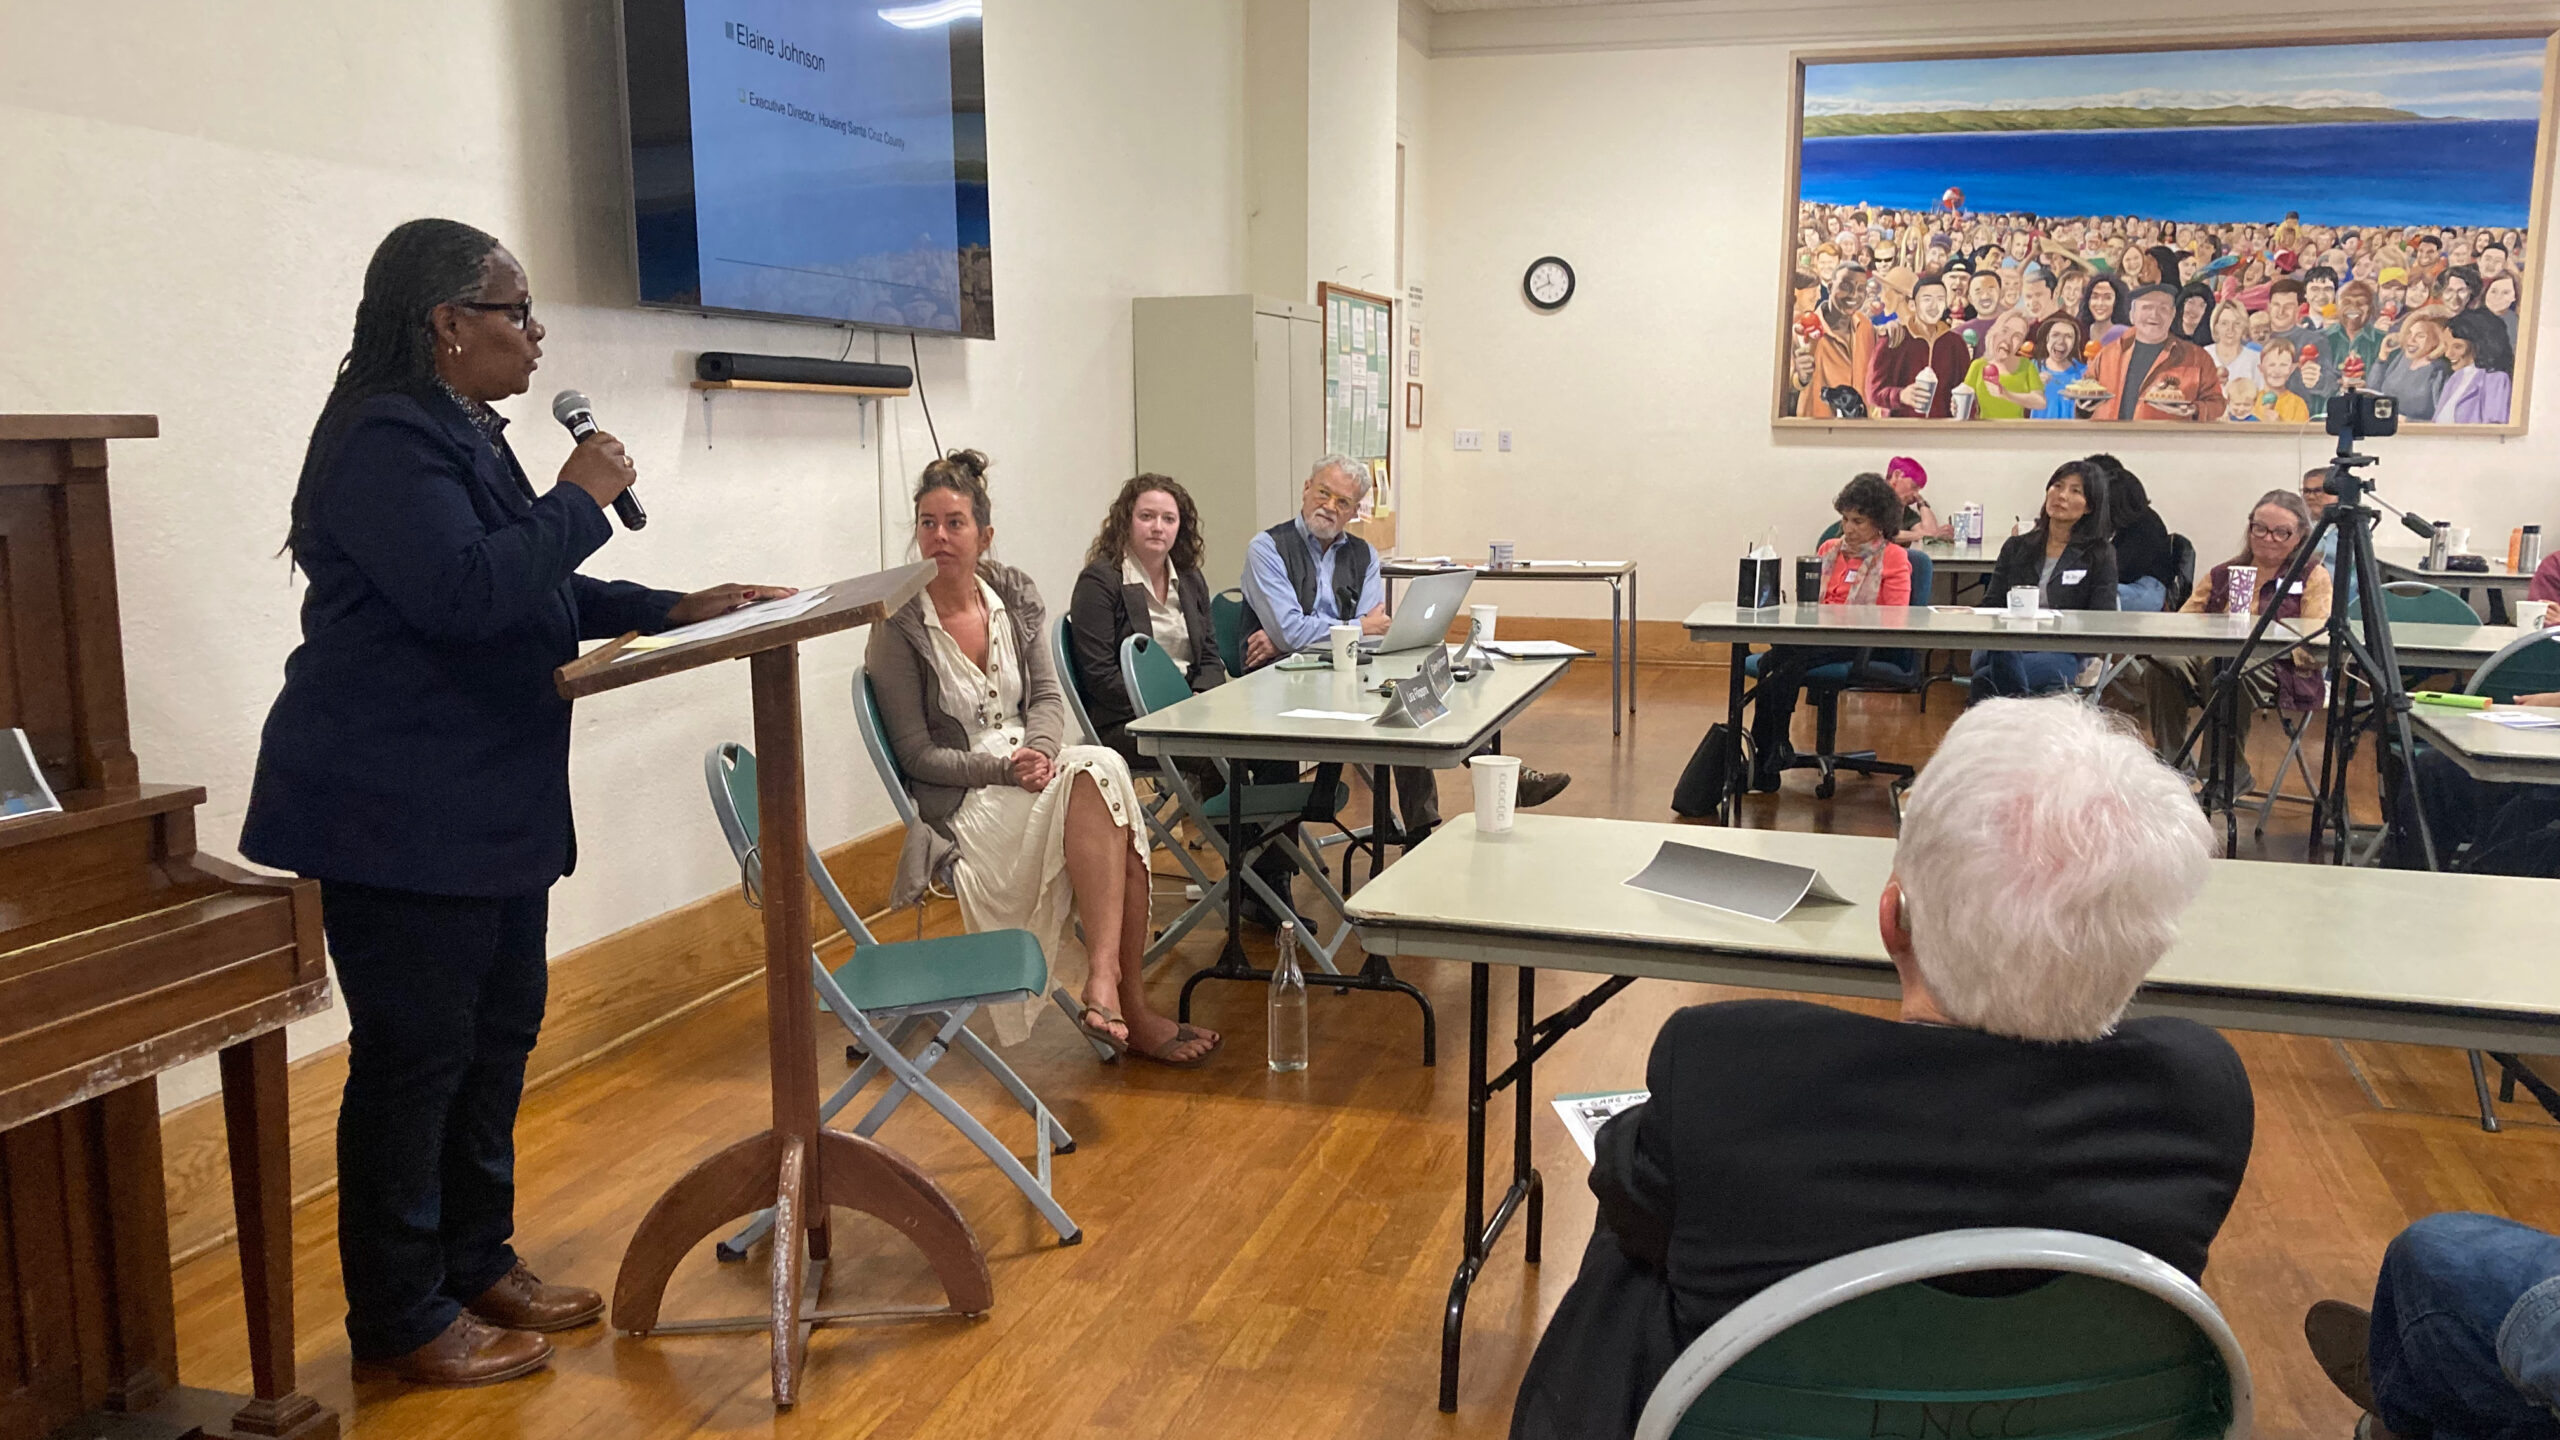 Elaine Johnson spoke at an Oct. 14 forum on affordable housing and potential solutions at London Nelson Community Center in Santa Cruz.